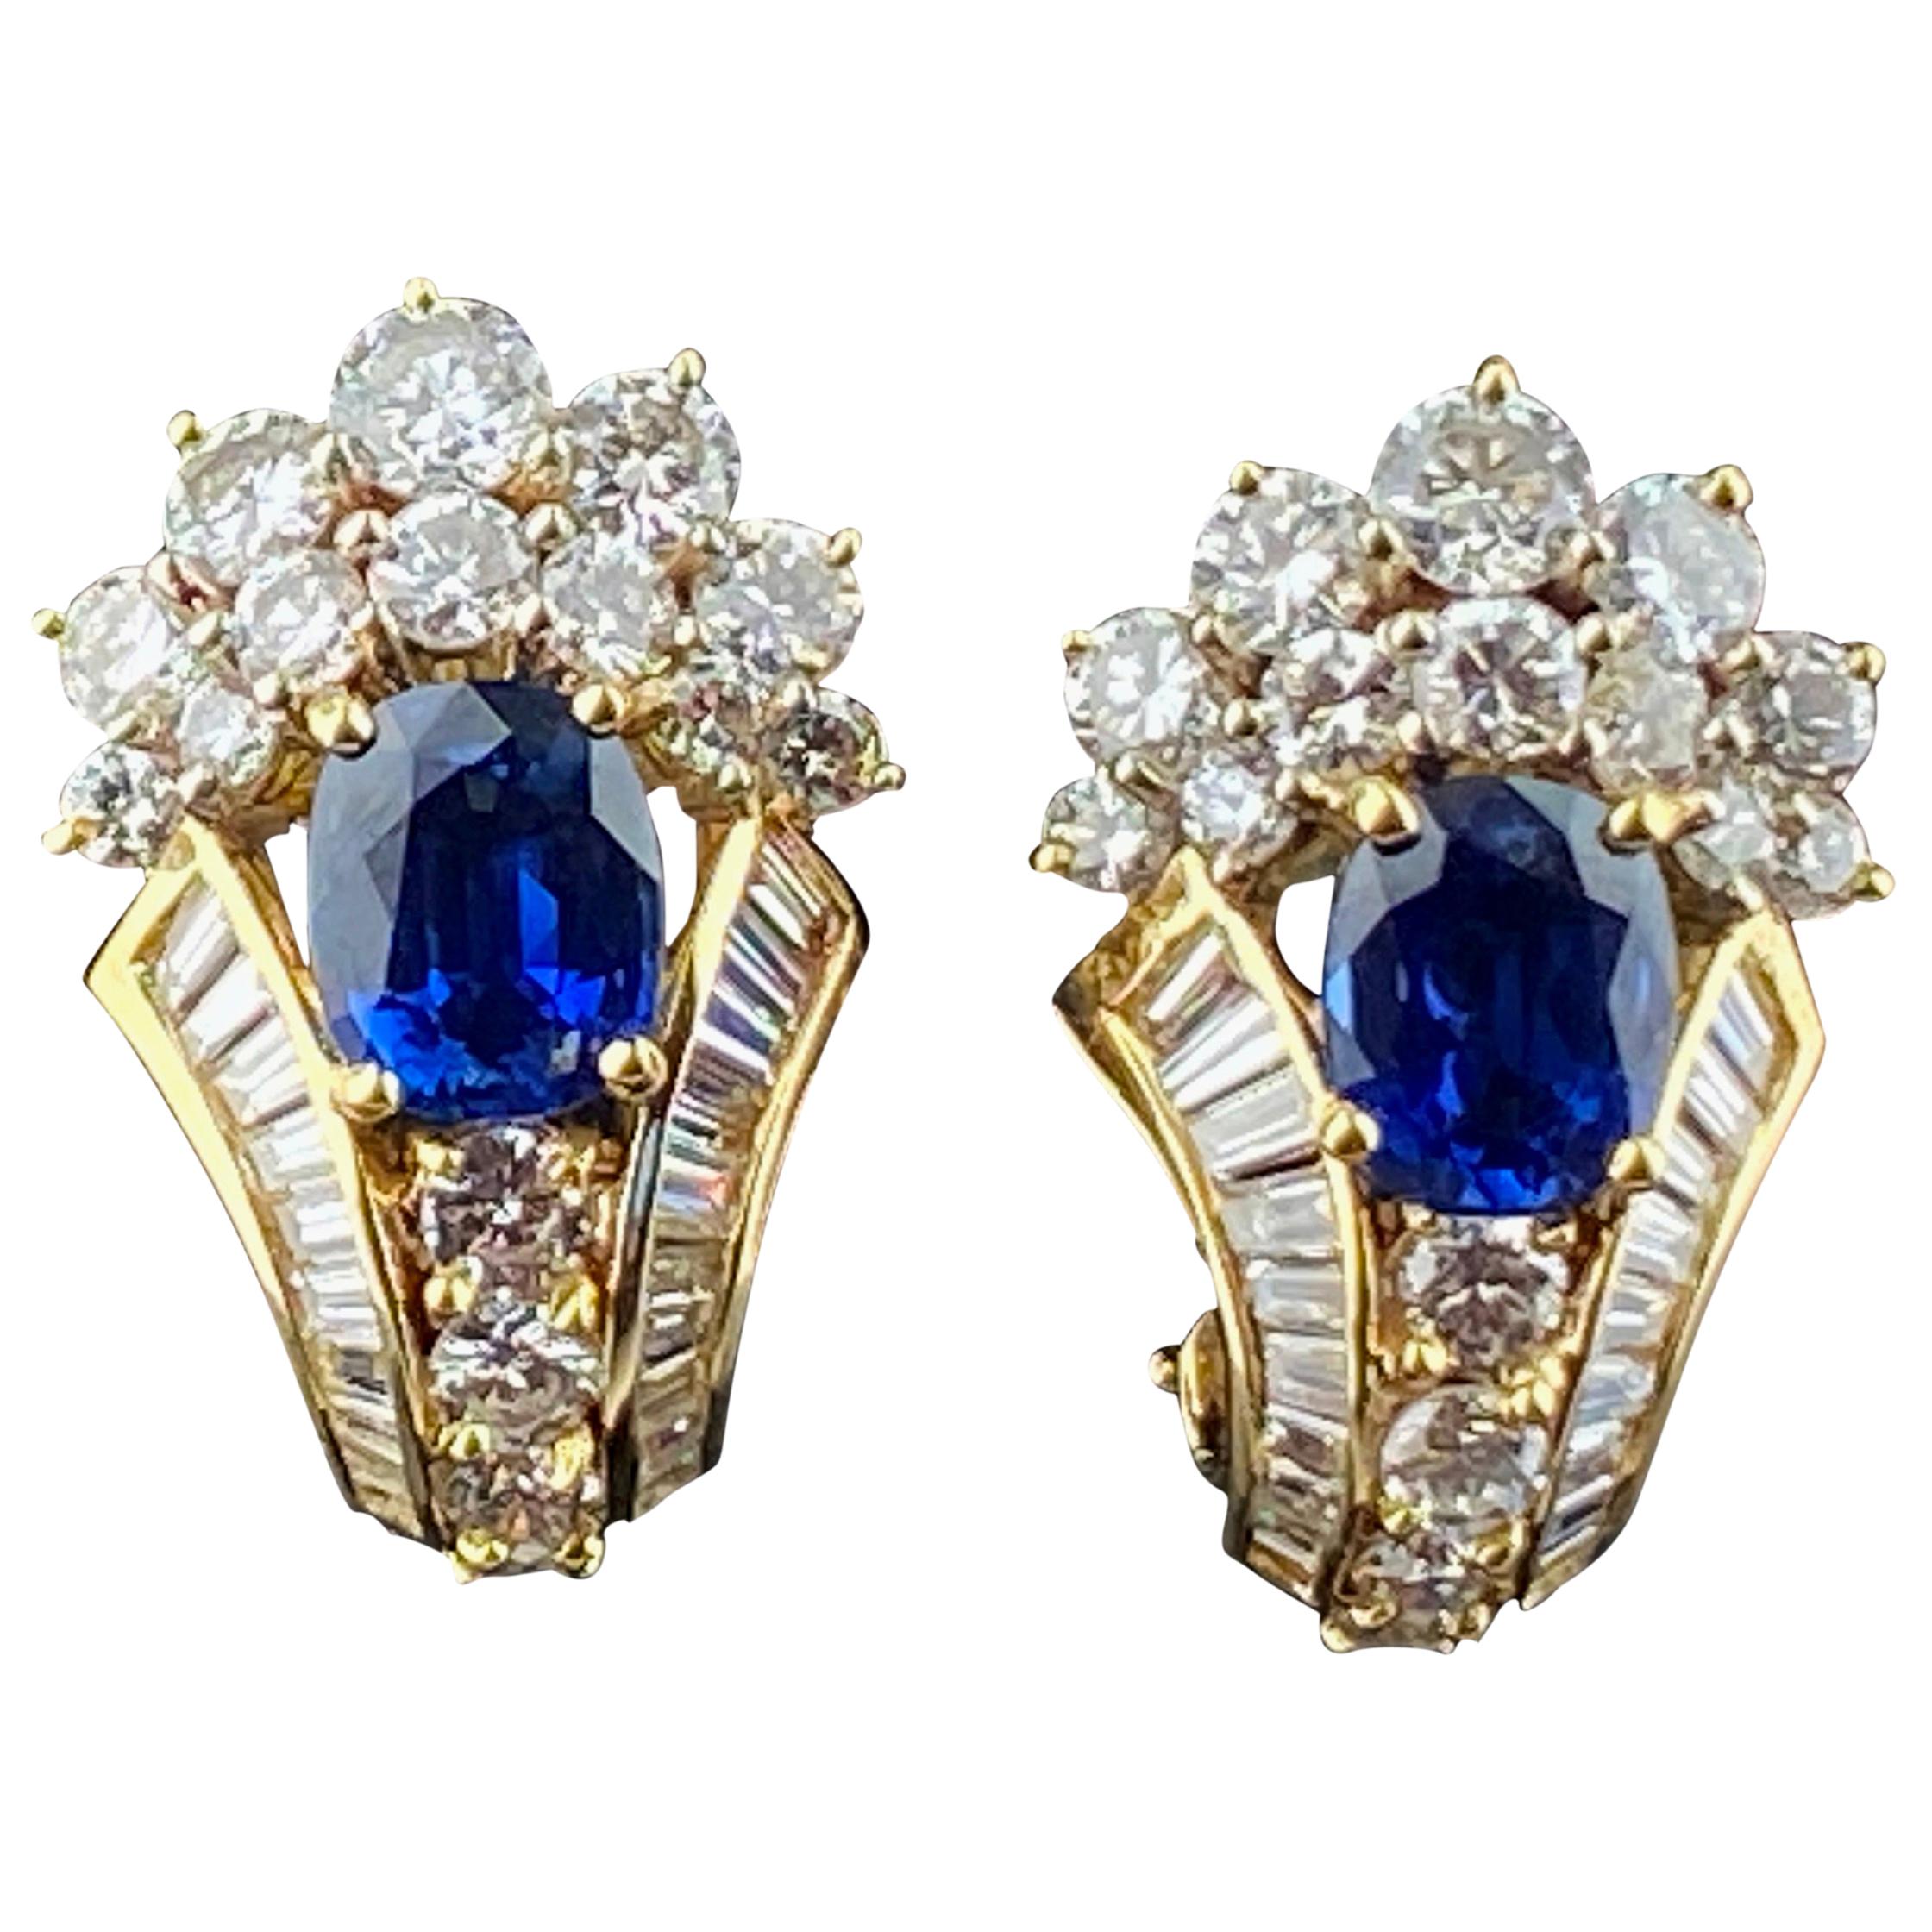 Sapphire Earrings Yellow Gold Stud Earrings Sapphires Solitaire Studs 